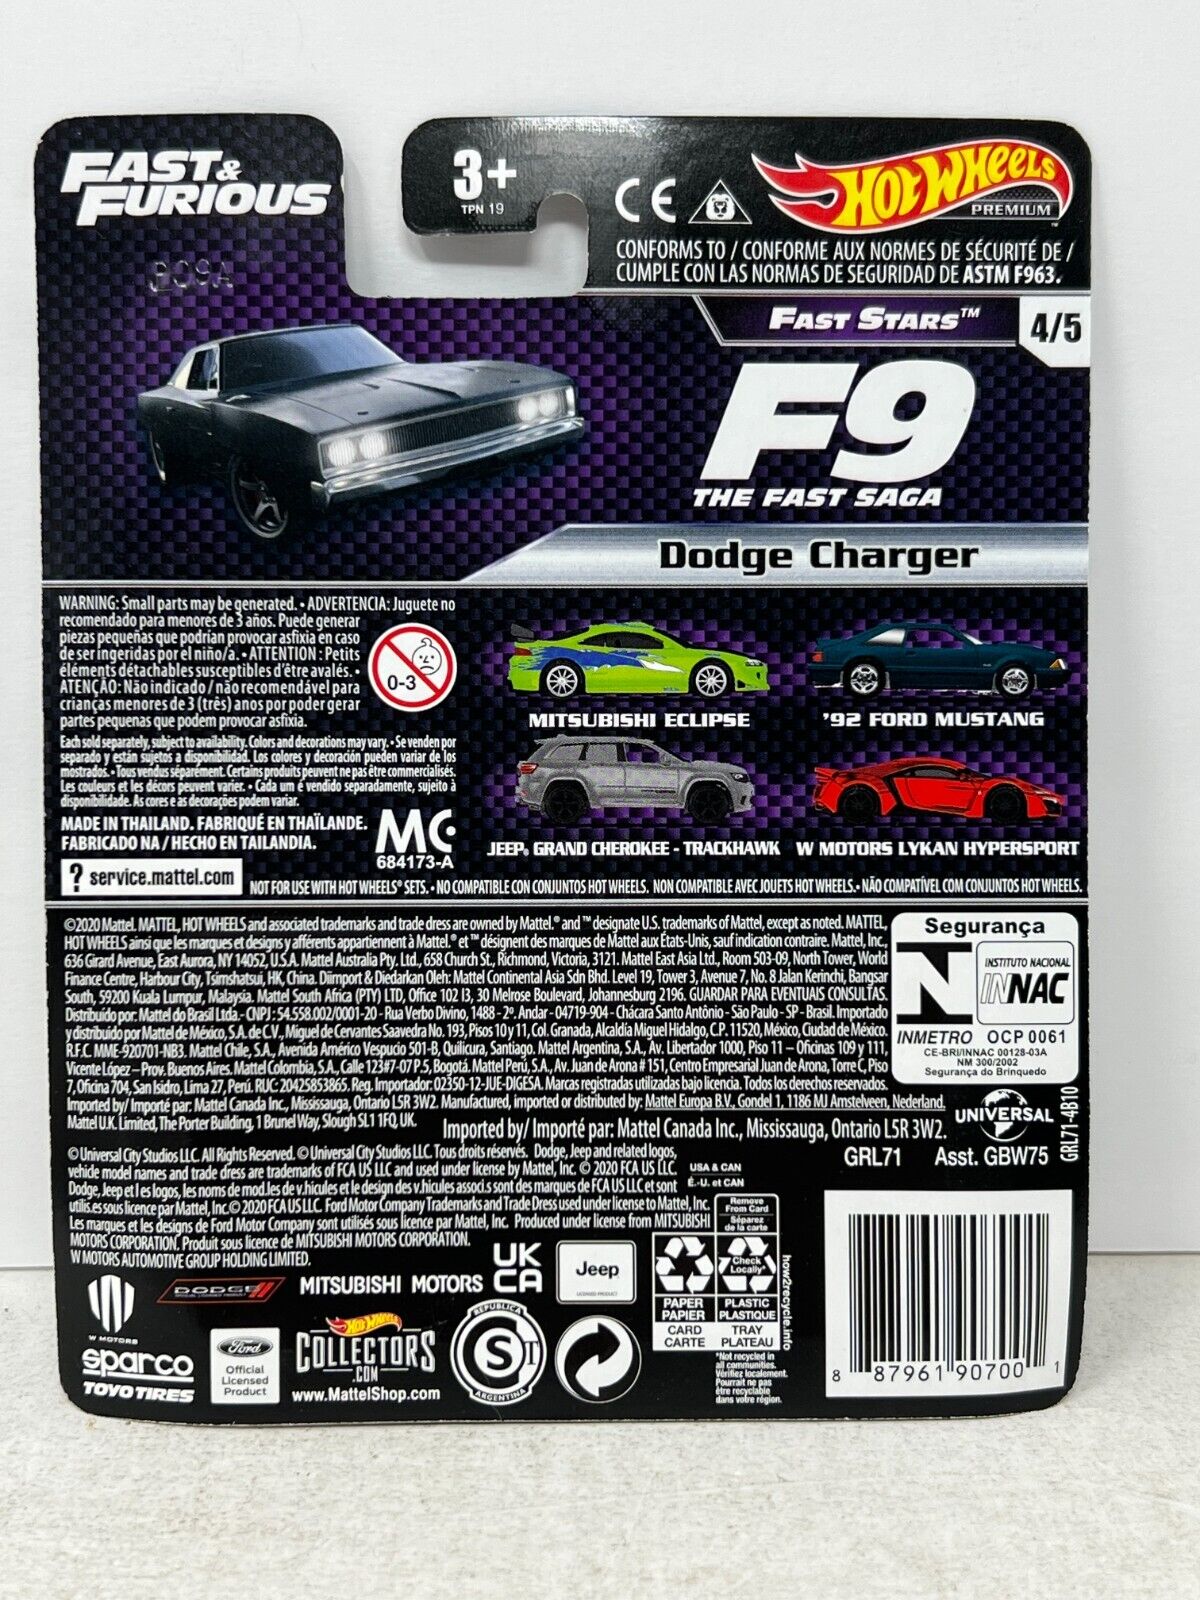 Hot Wheels Premium Fast & Furious Fast Stars Dodge Charger 1:64 Diecast